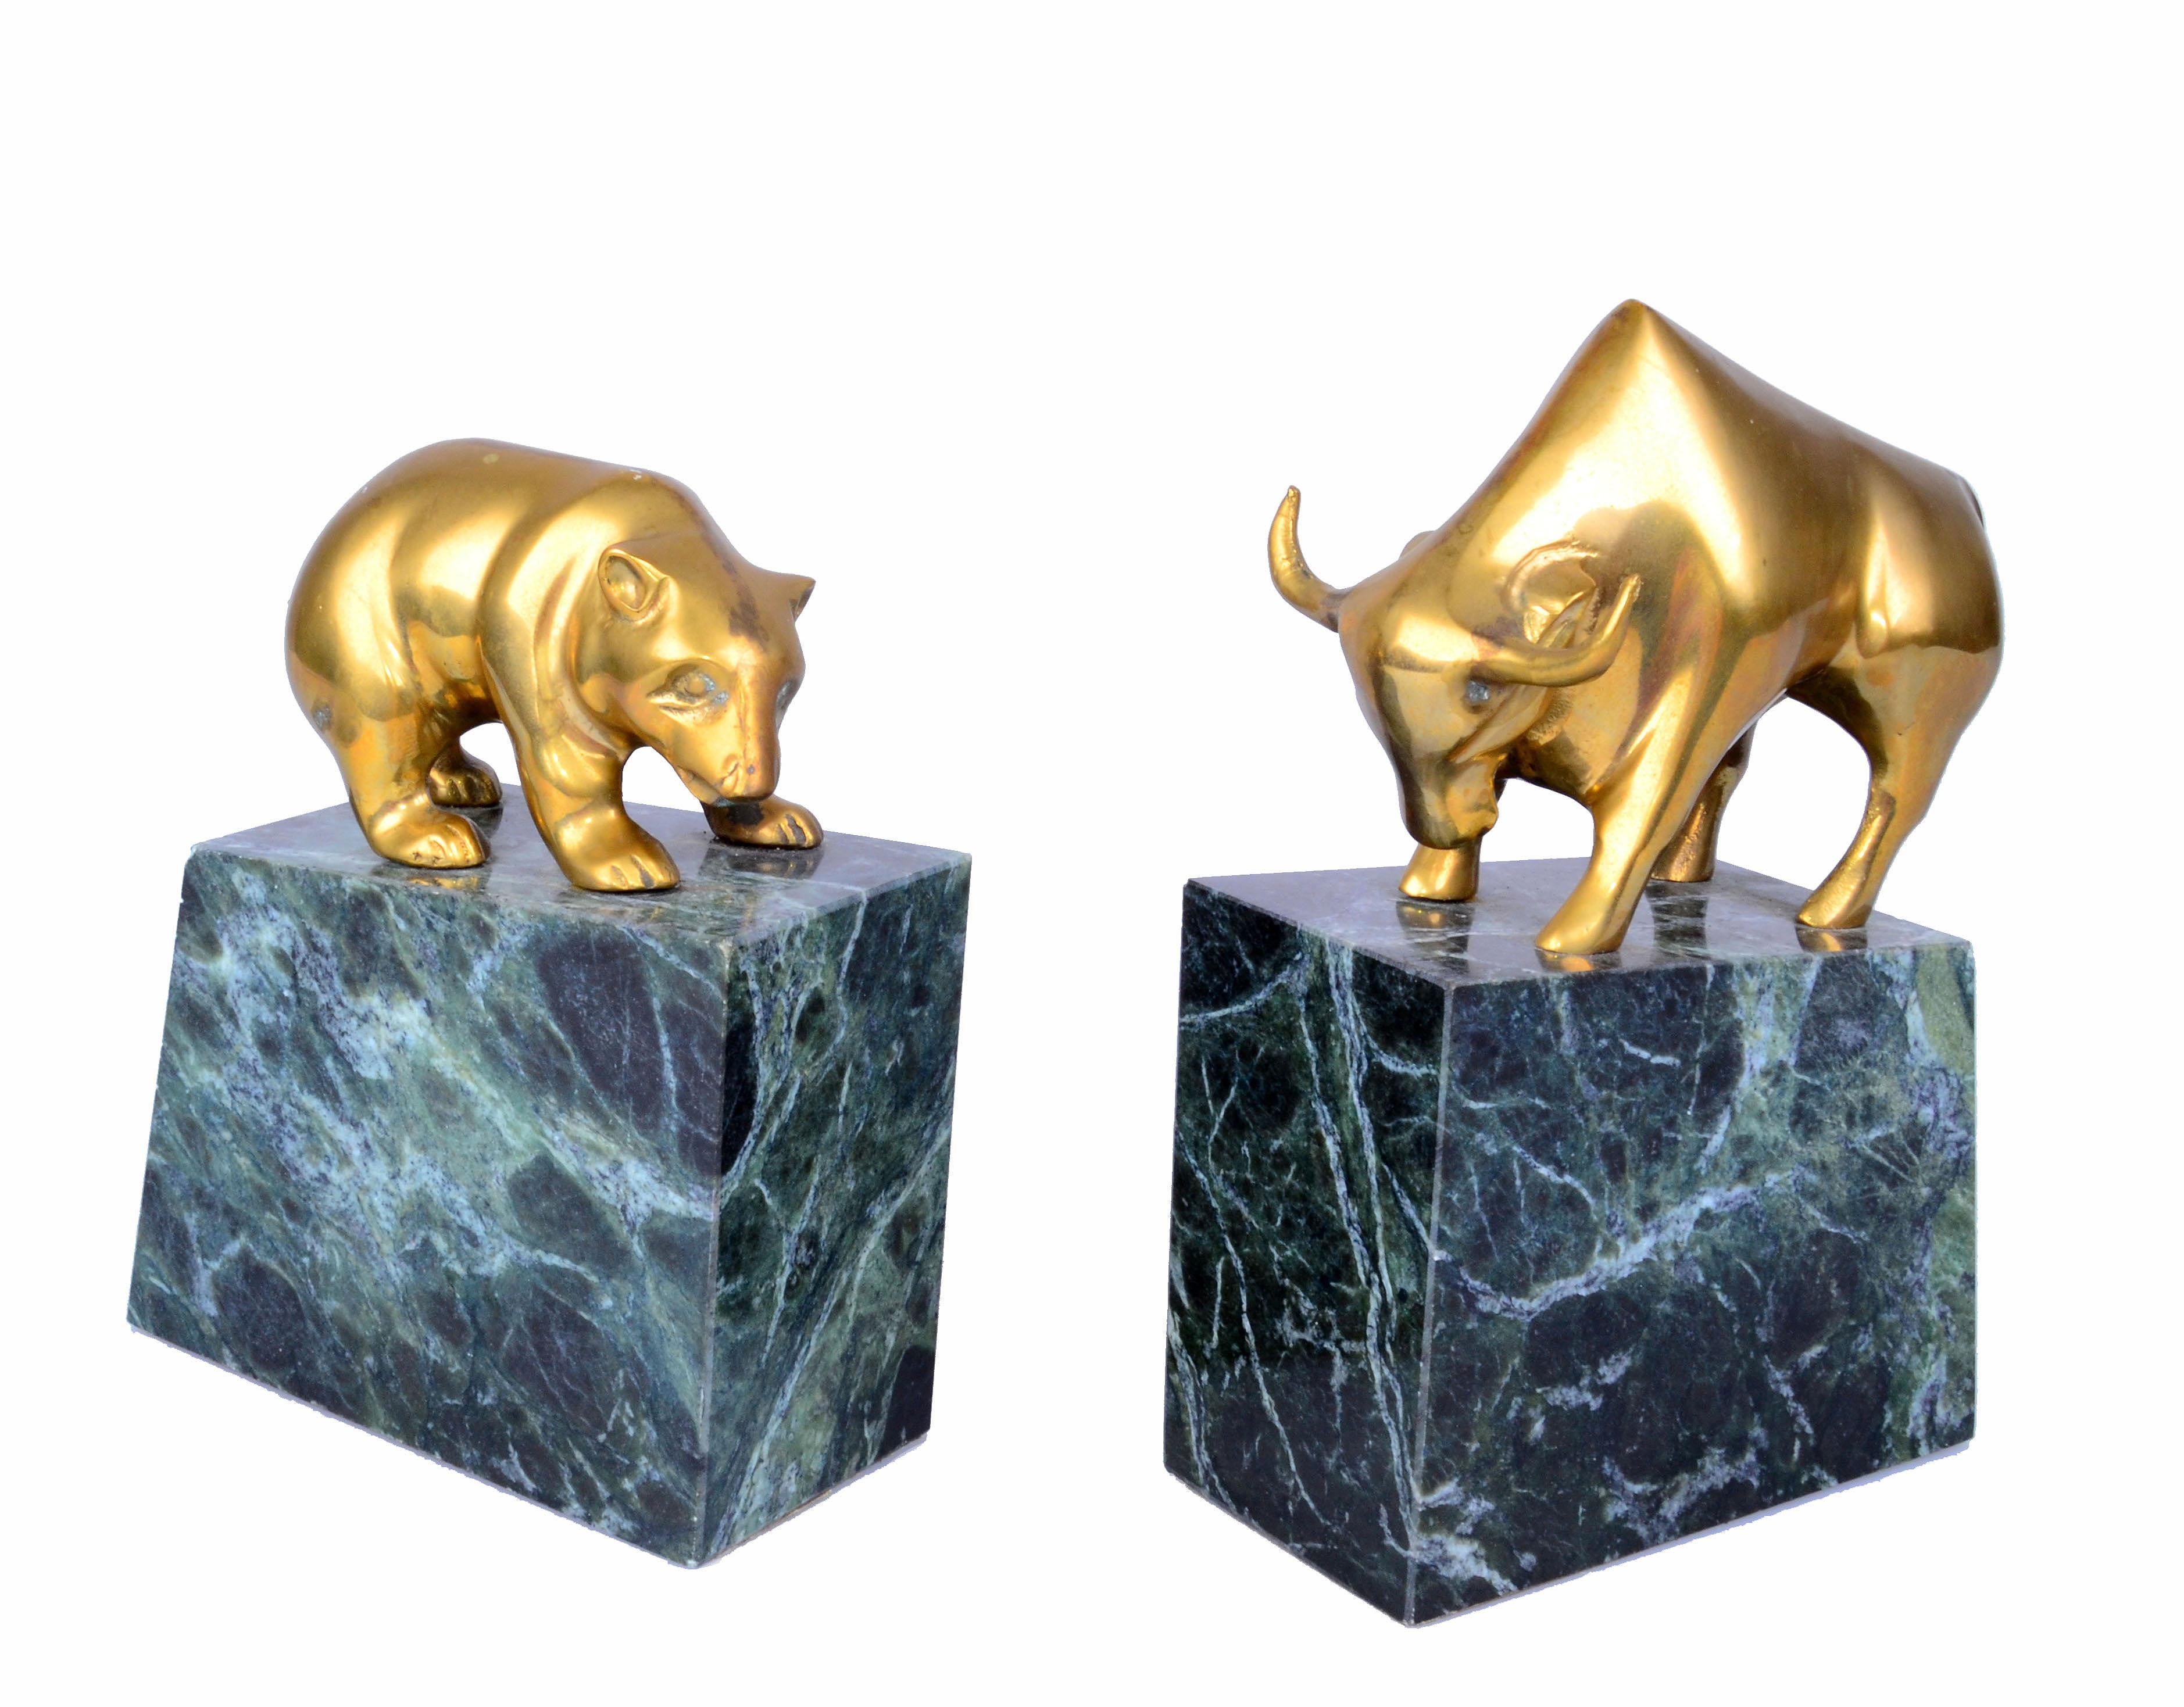 bull bookends